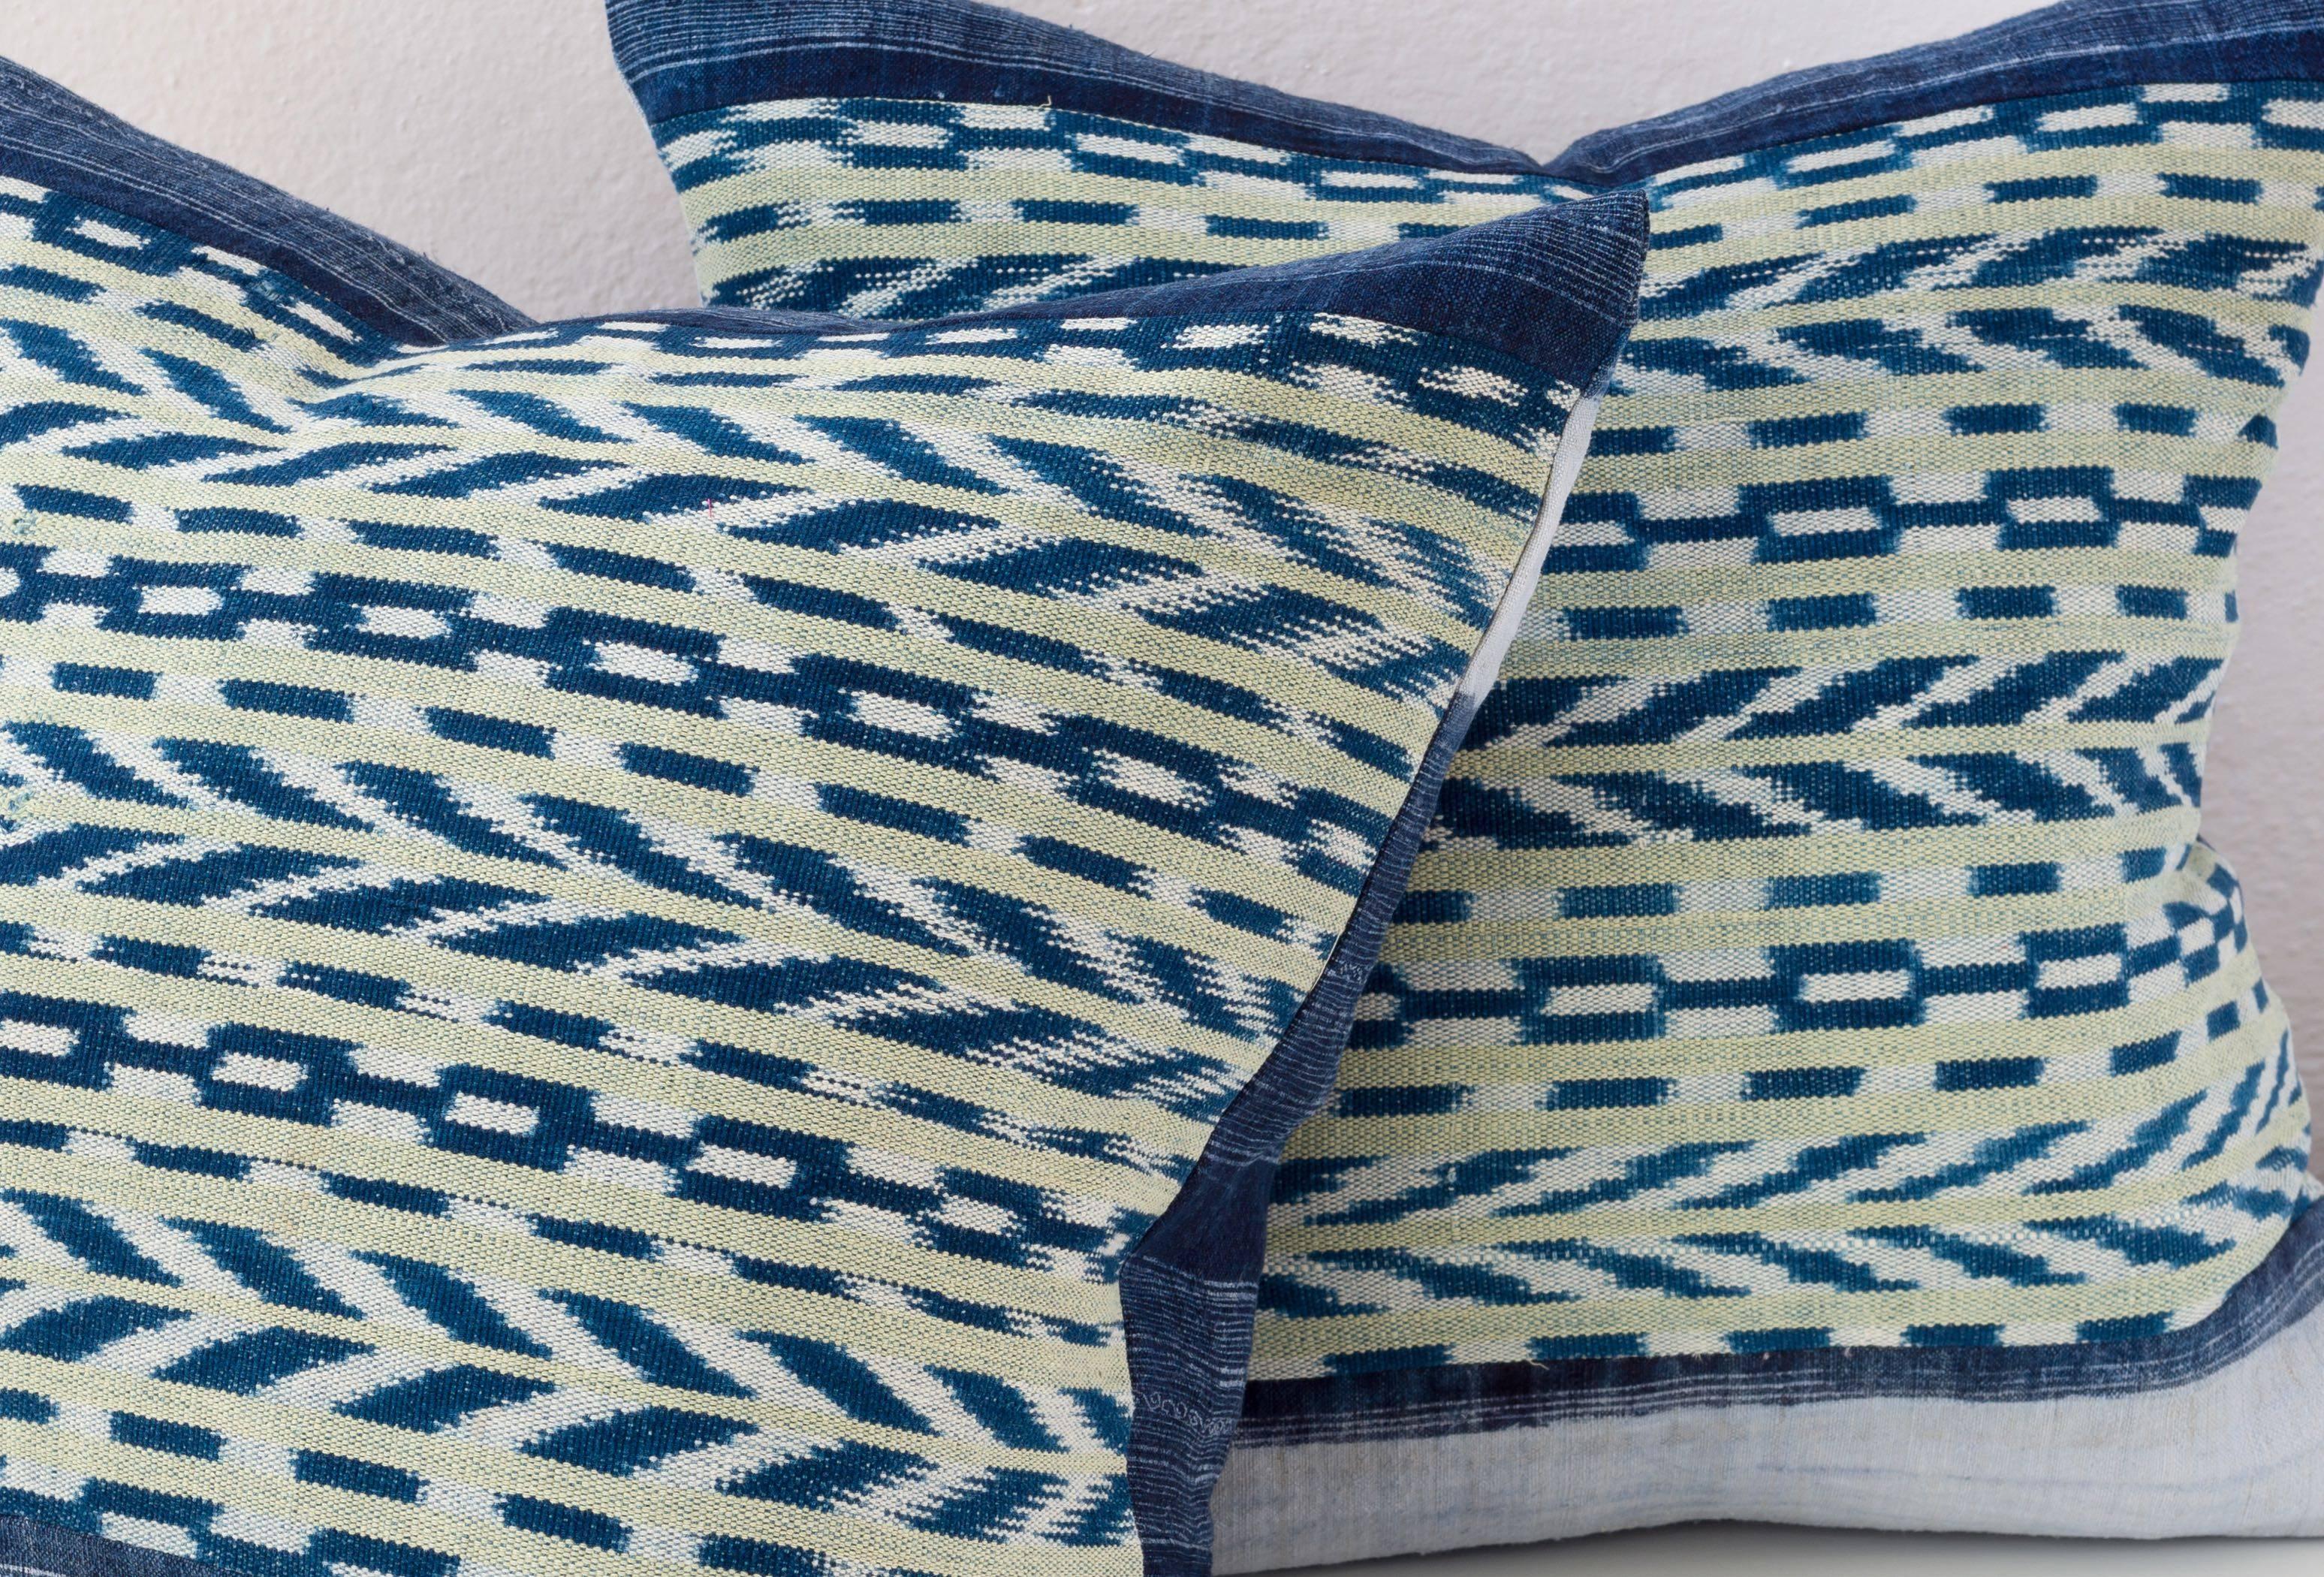 Hand-Woven Pillow, Dong Indigo Stripe with Guatemalan Panels in Blue and Yellow For Sale